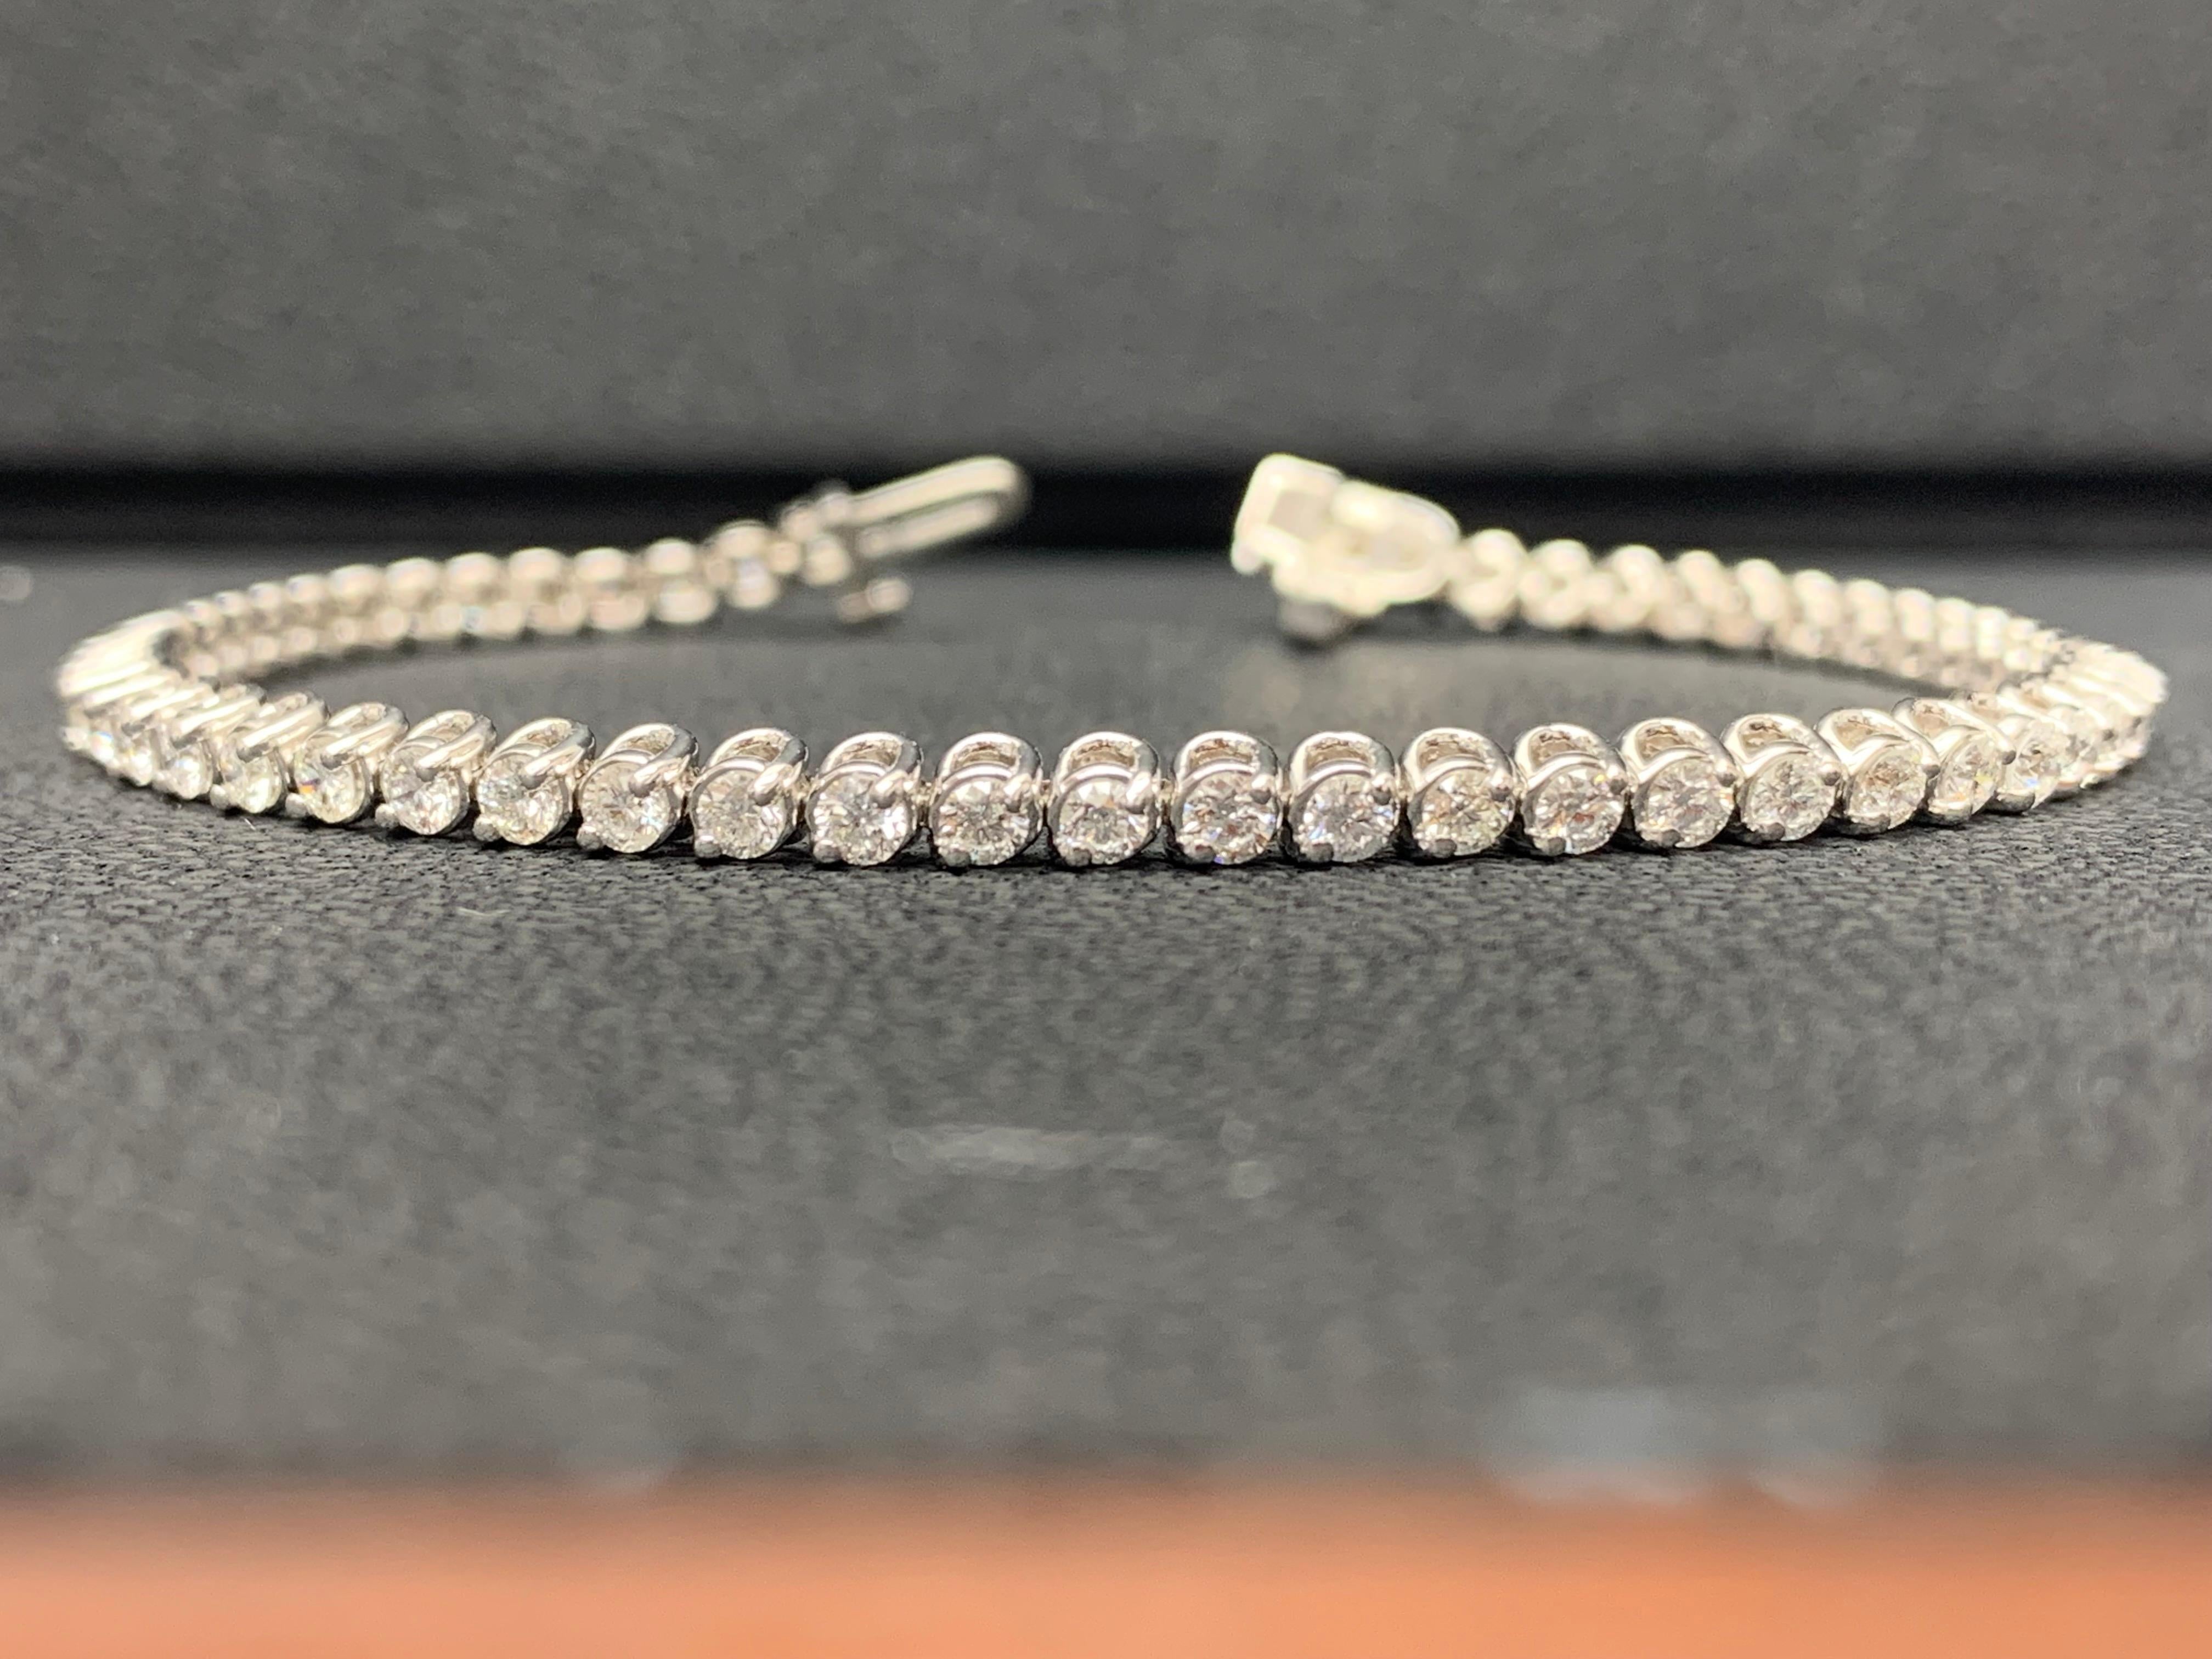 A brilliant tennis bracelet showcasing a row of round brilliant diamonds, set in a bezel mounting made in 14K White Gold. Diamonds weigh 2.92 carats total.
All diamonds are GH color SI1 Clarity.
Available in Yellow and Rose as well.
Style available